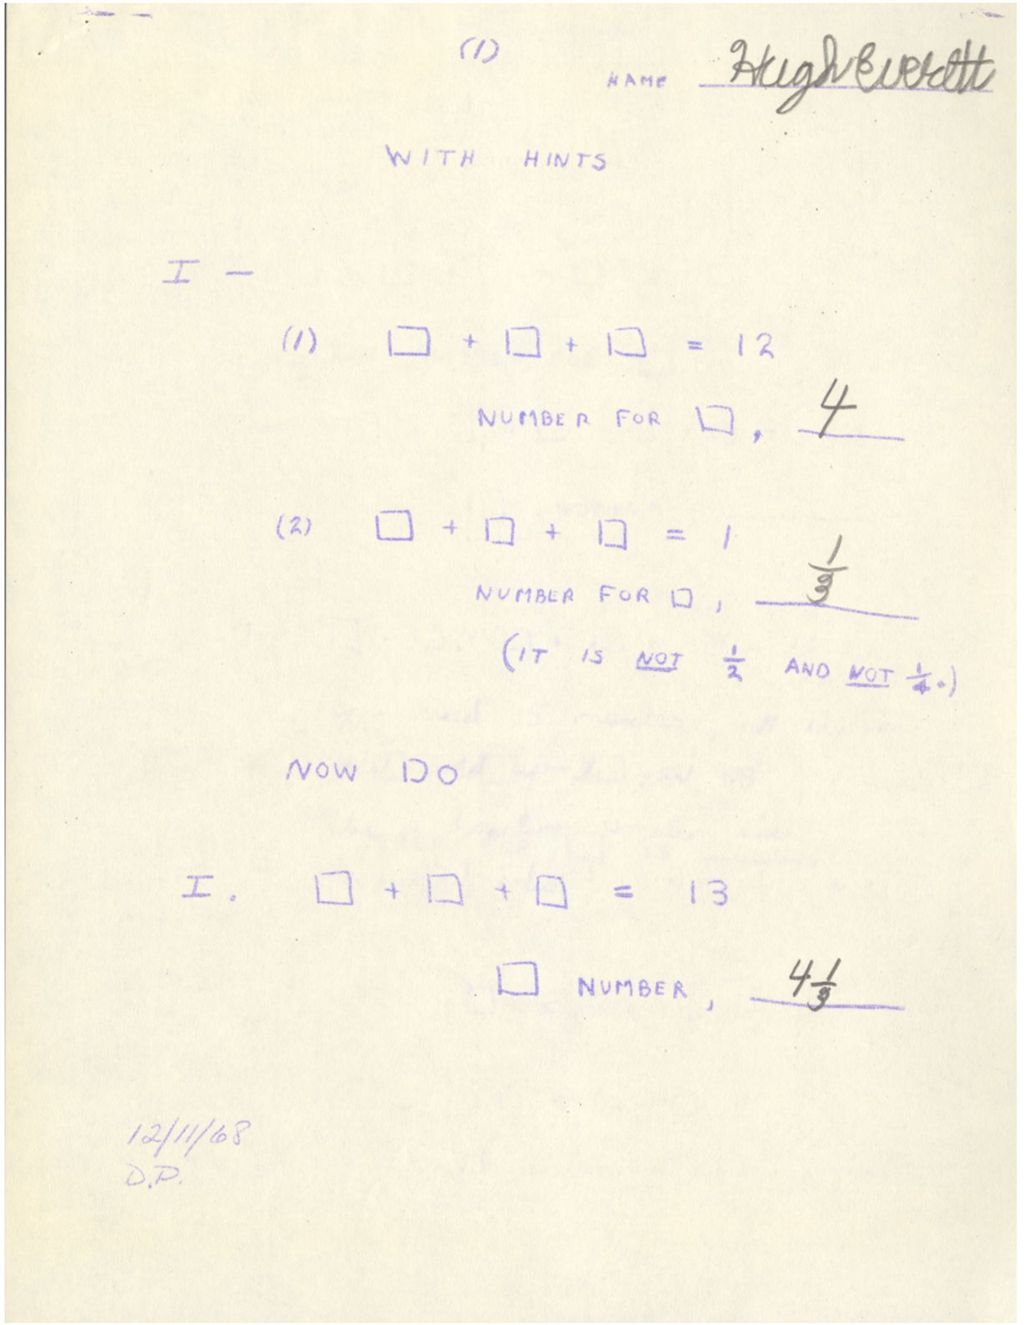 Miniature of First Problems with and without hints
[Interesting early algebraic thinking problems]